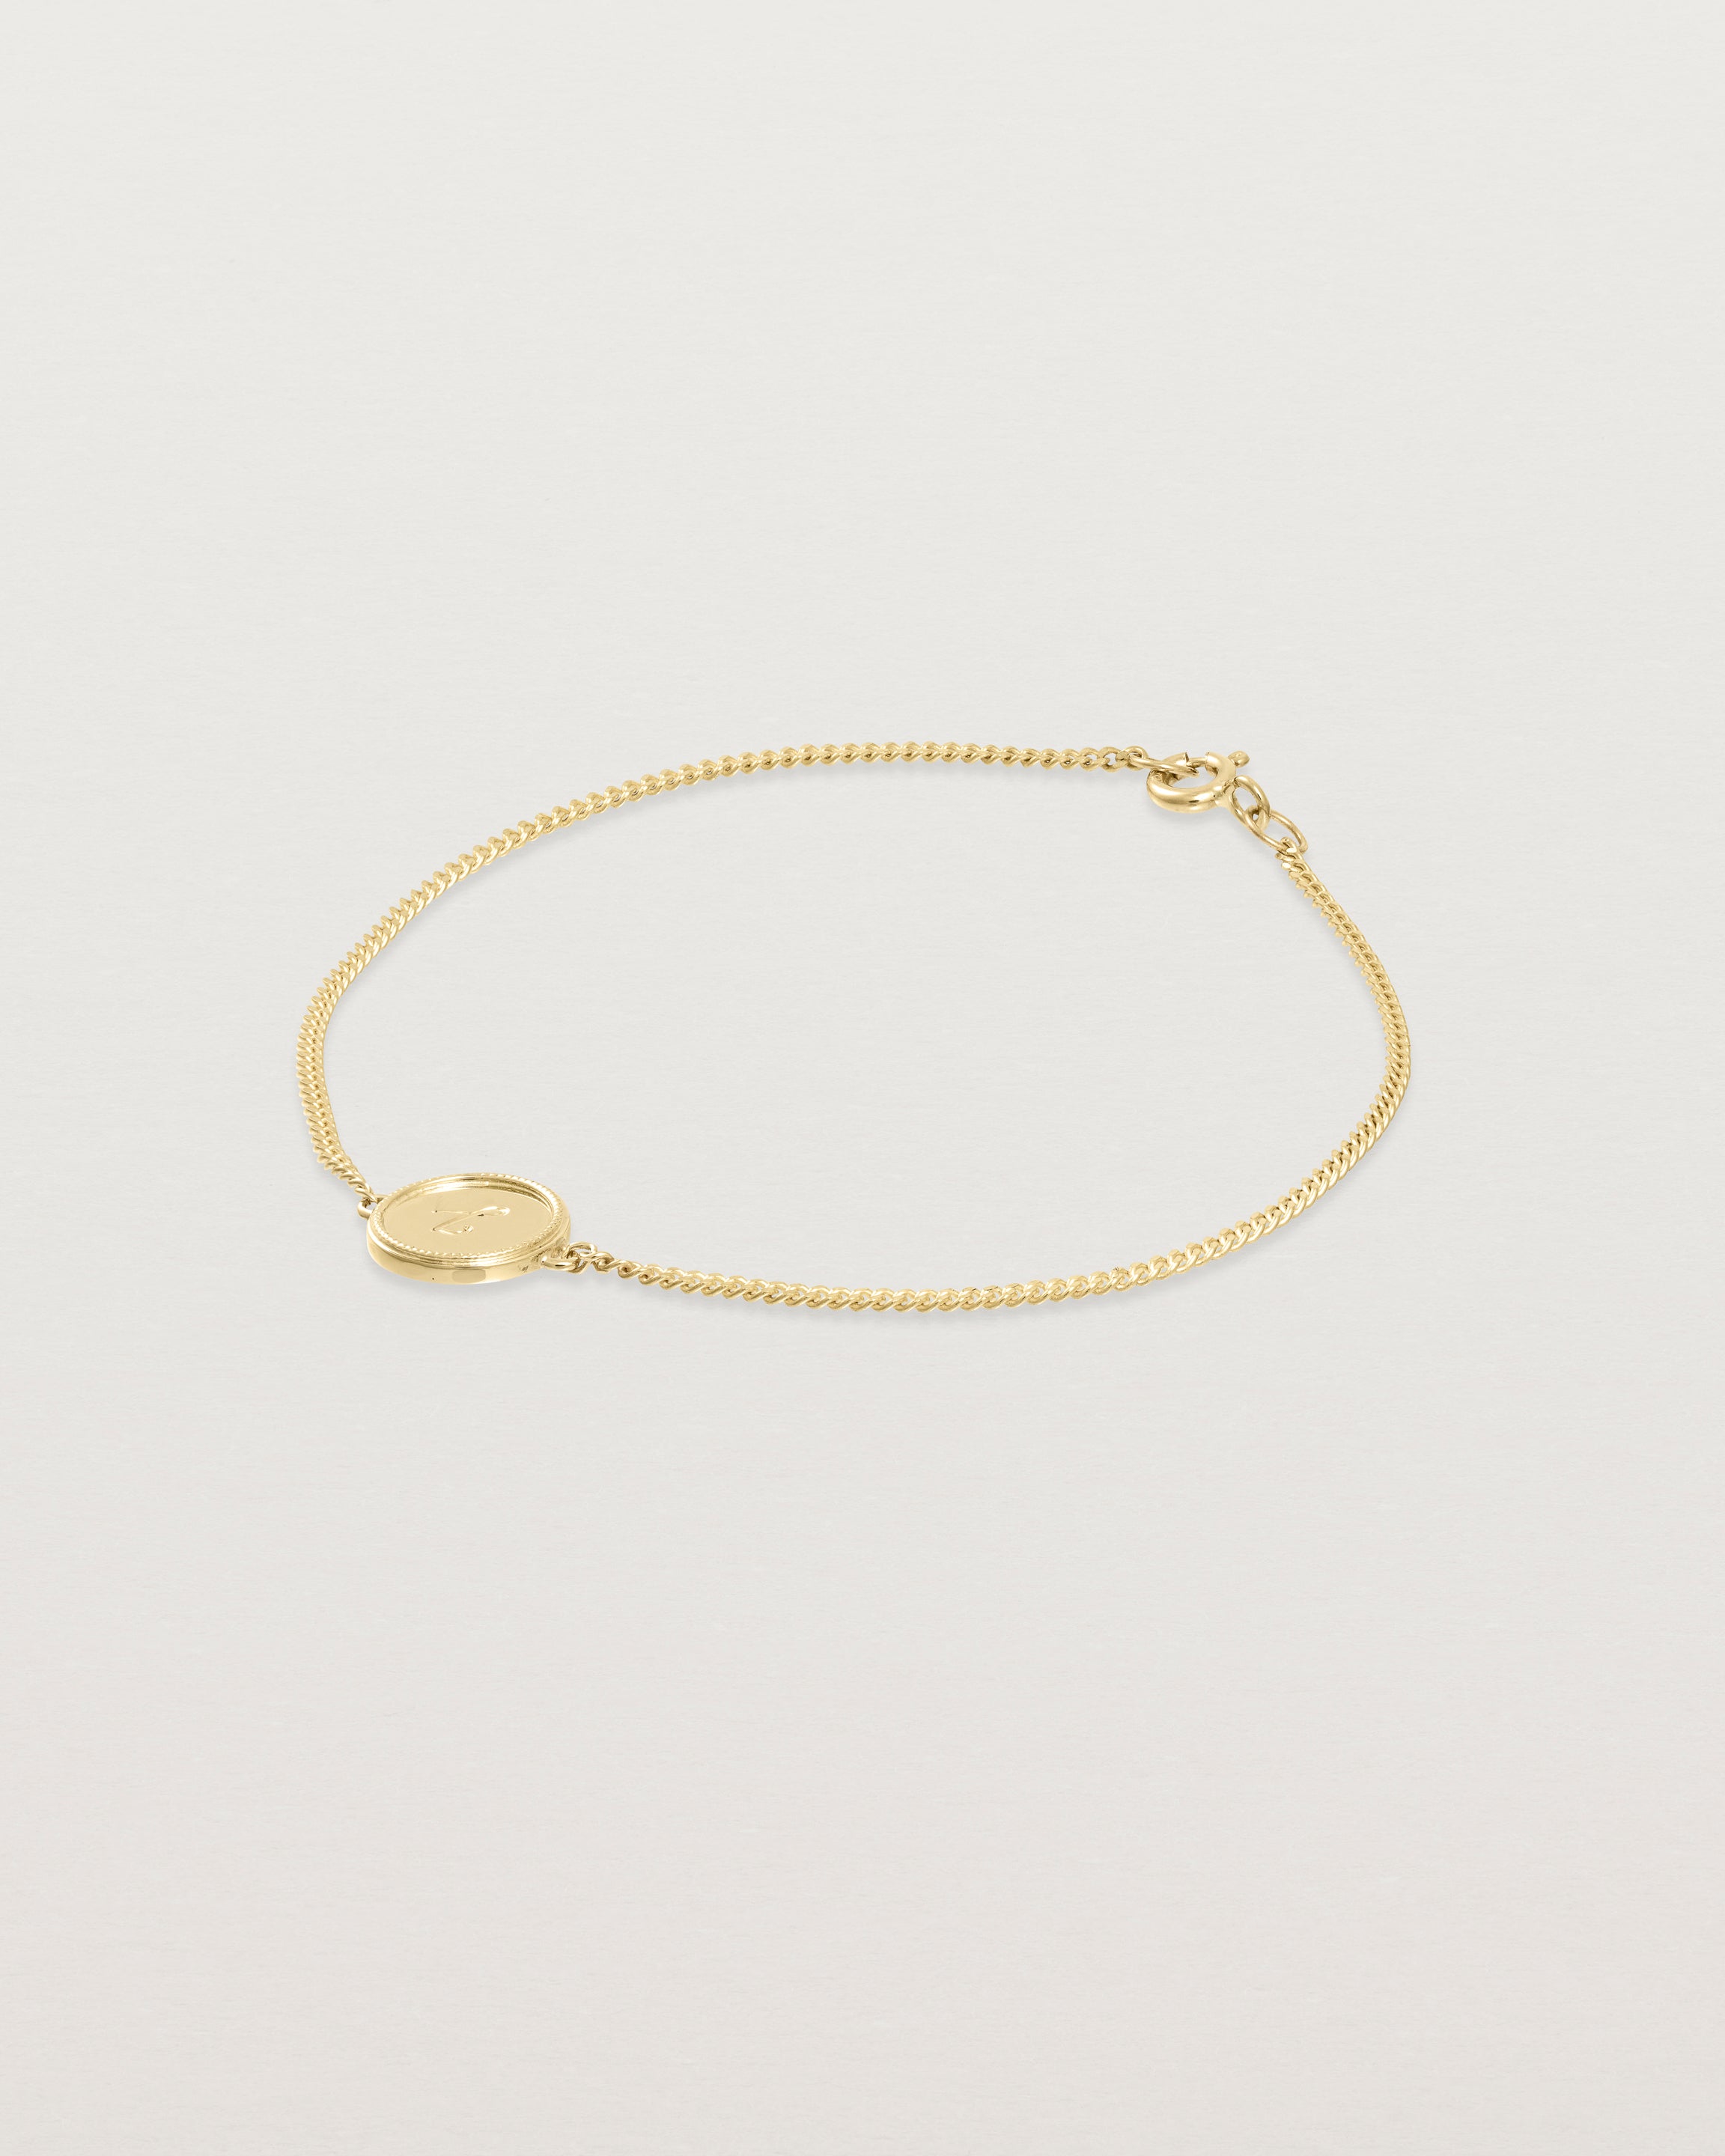 Angled view of the Precious Initial Bracelet in yellow gold.